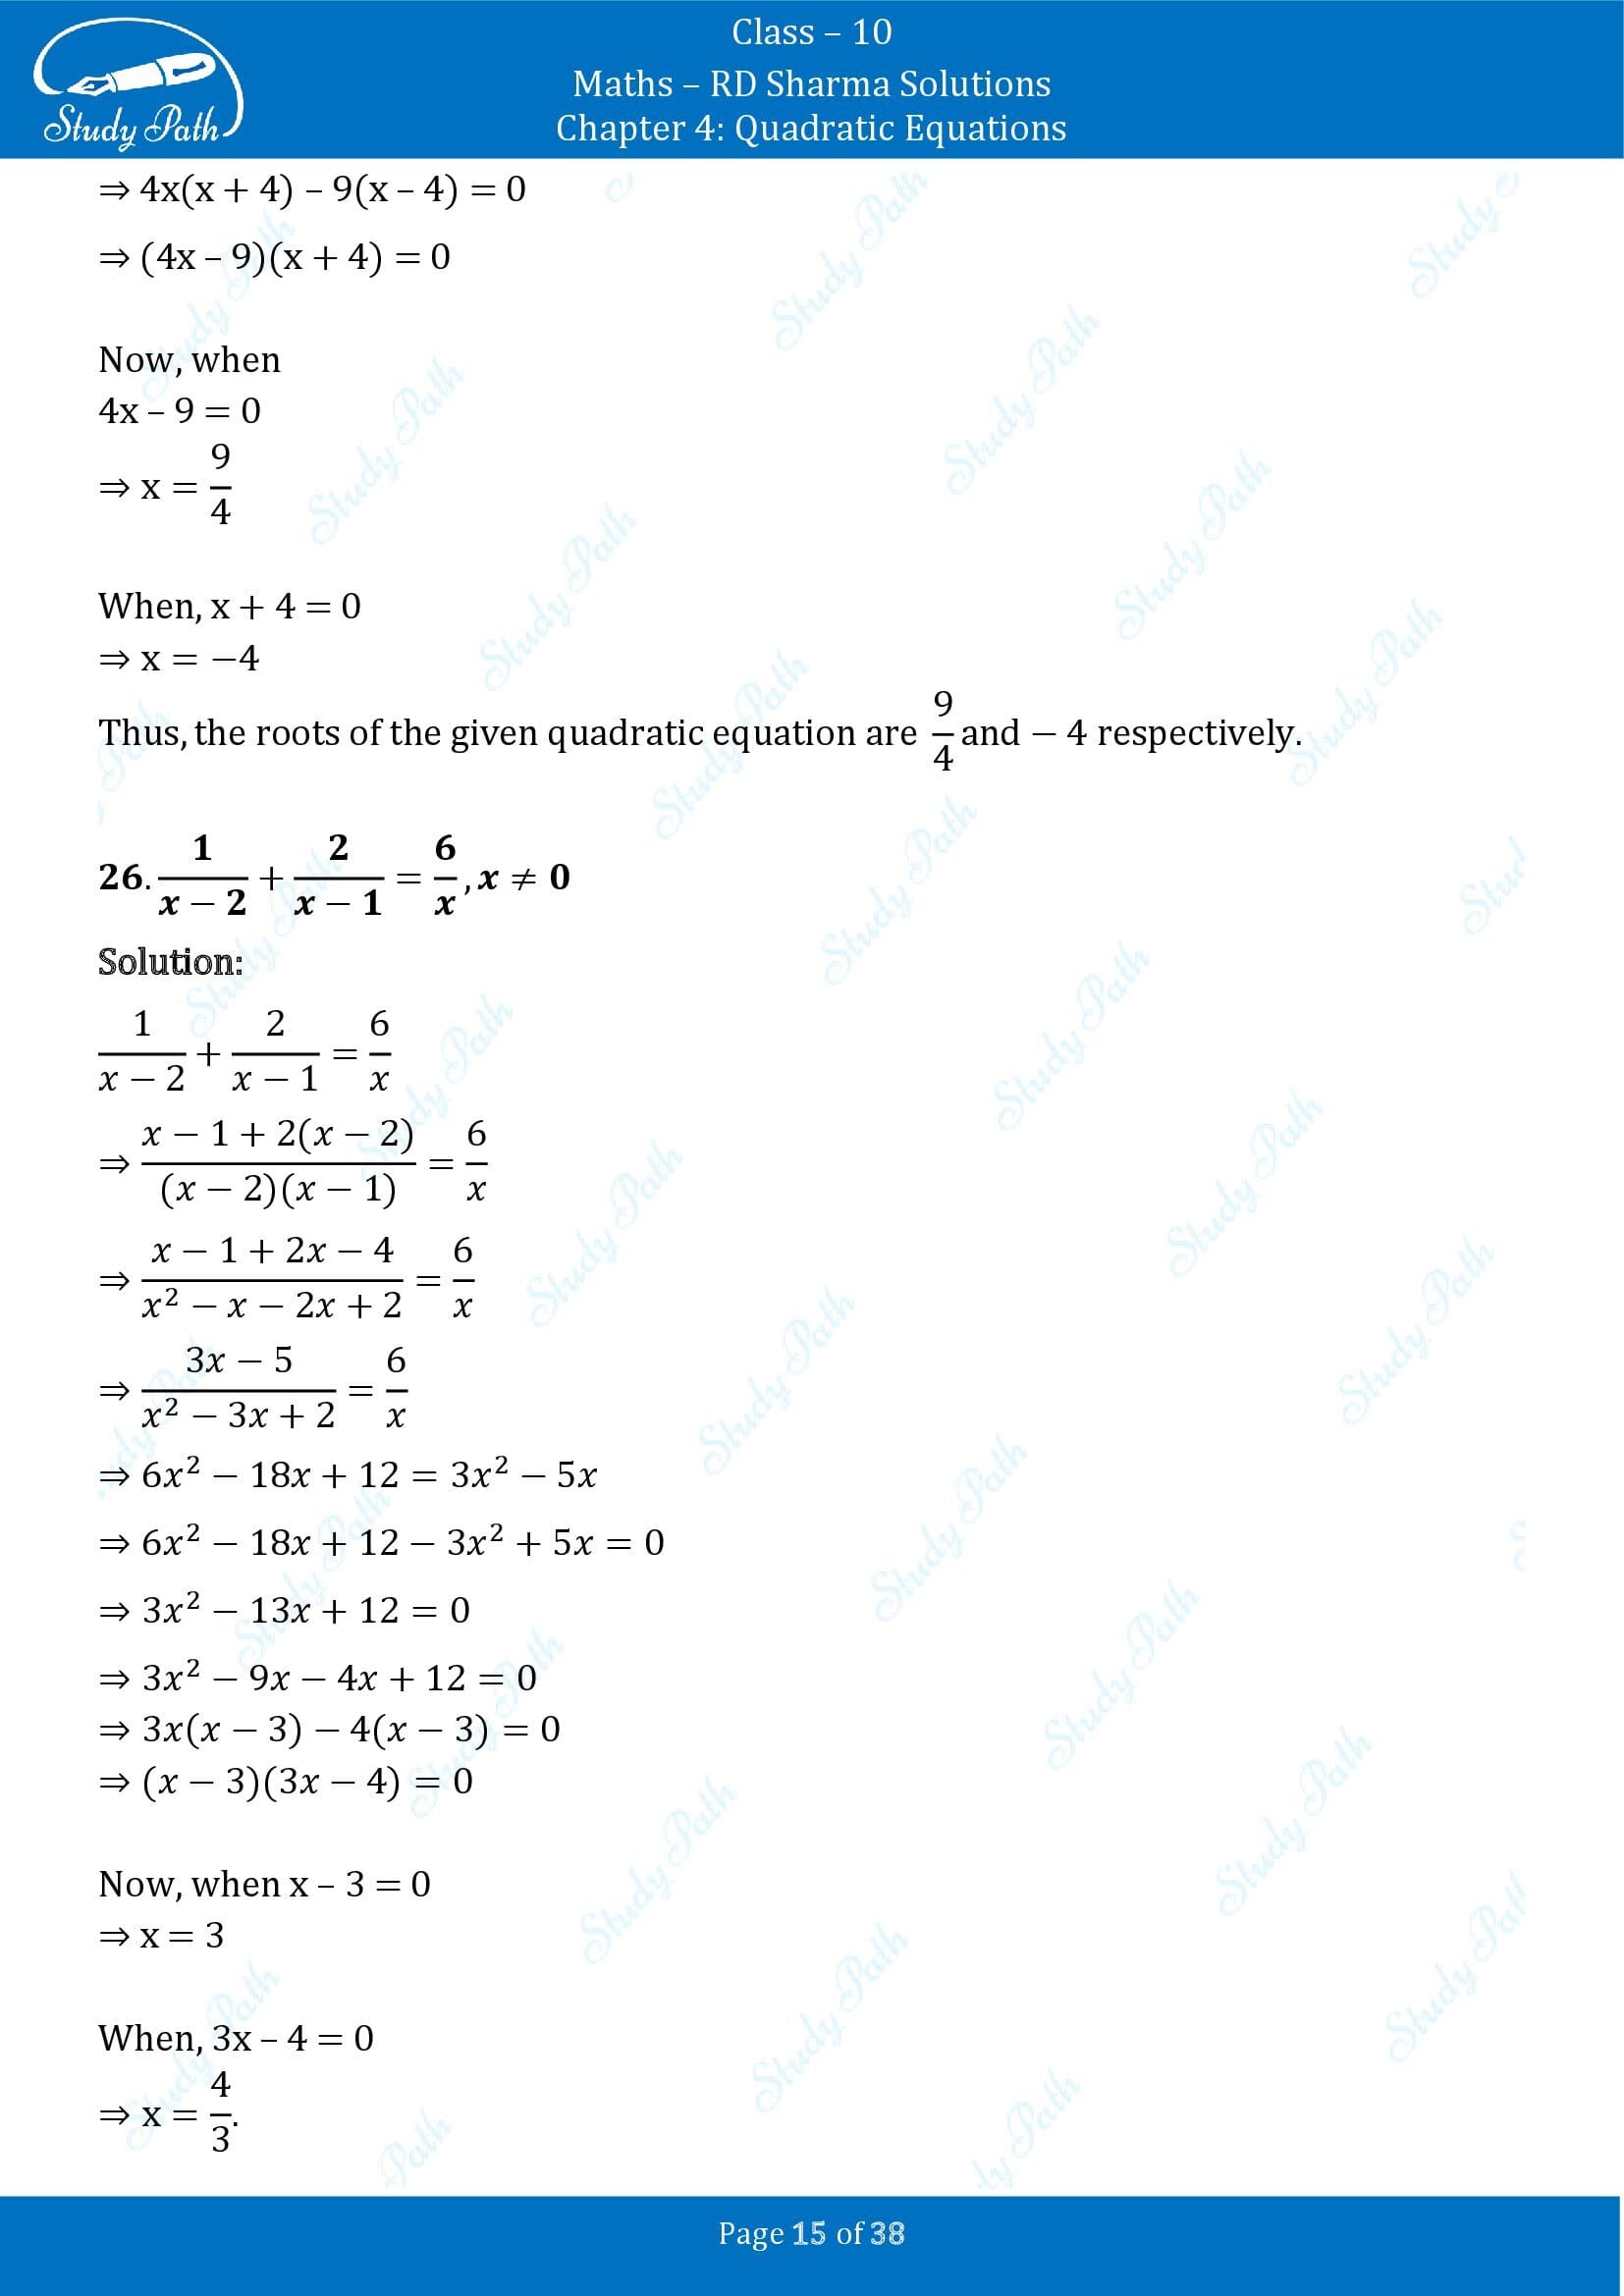 RD Sharma Solutions Class 10 Chapter 4 Quadratic Equations Exercise 4.3 00015